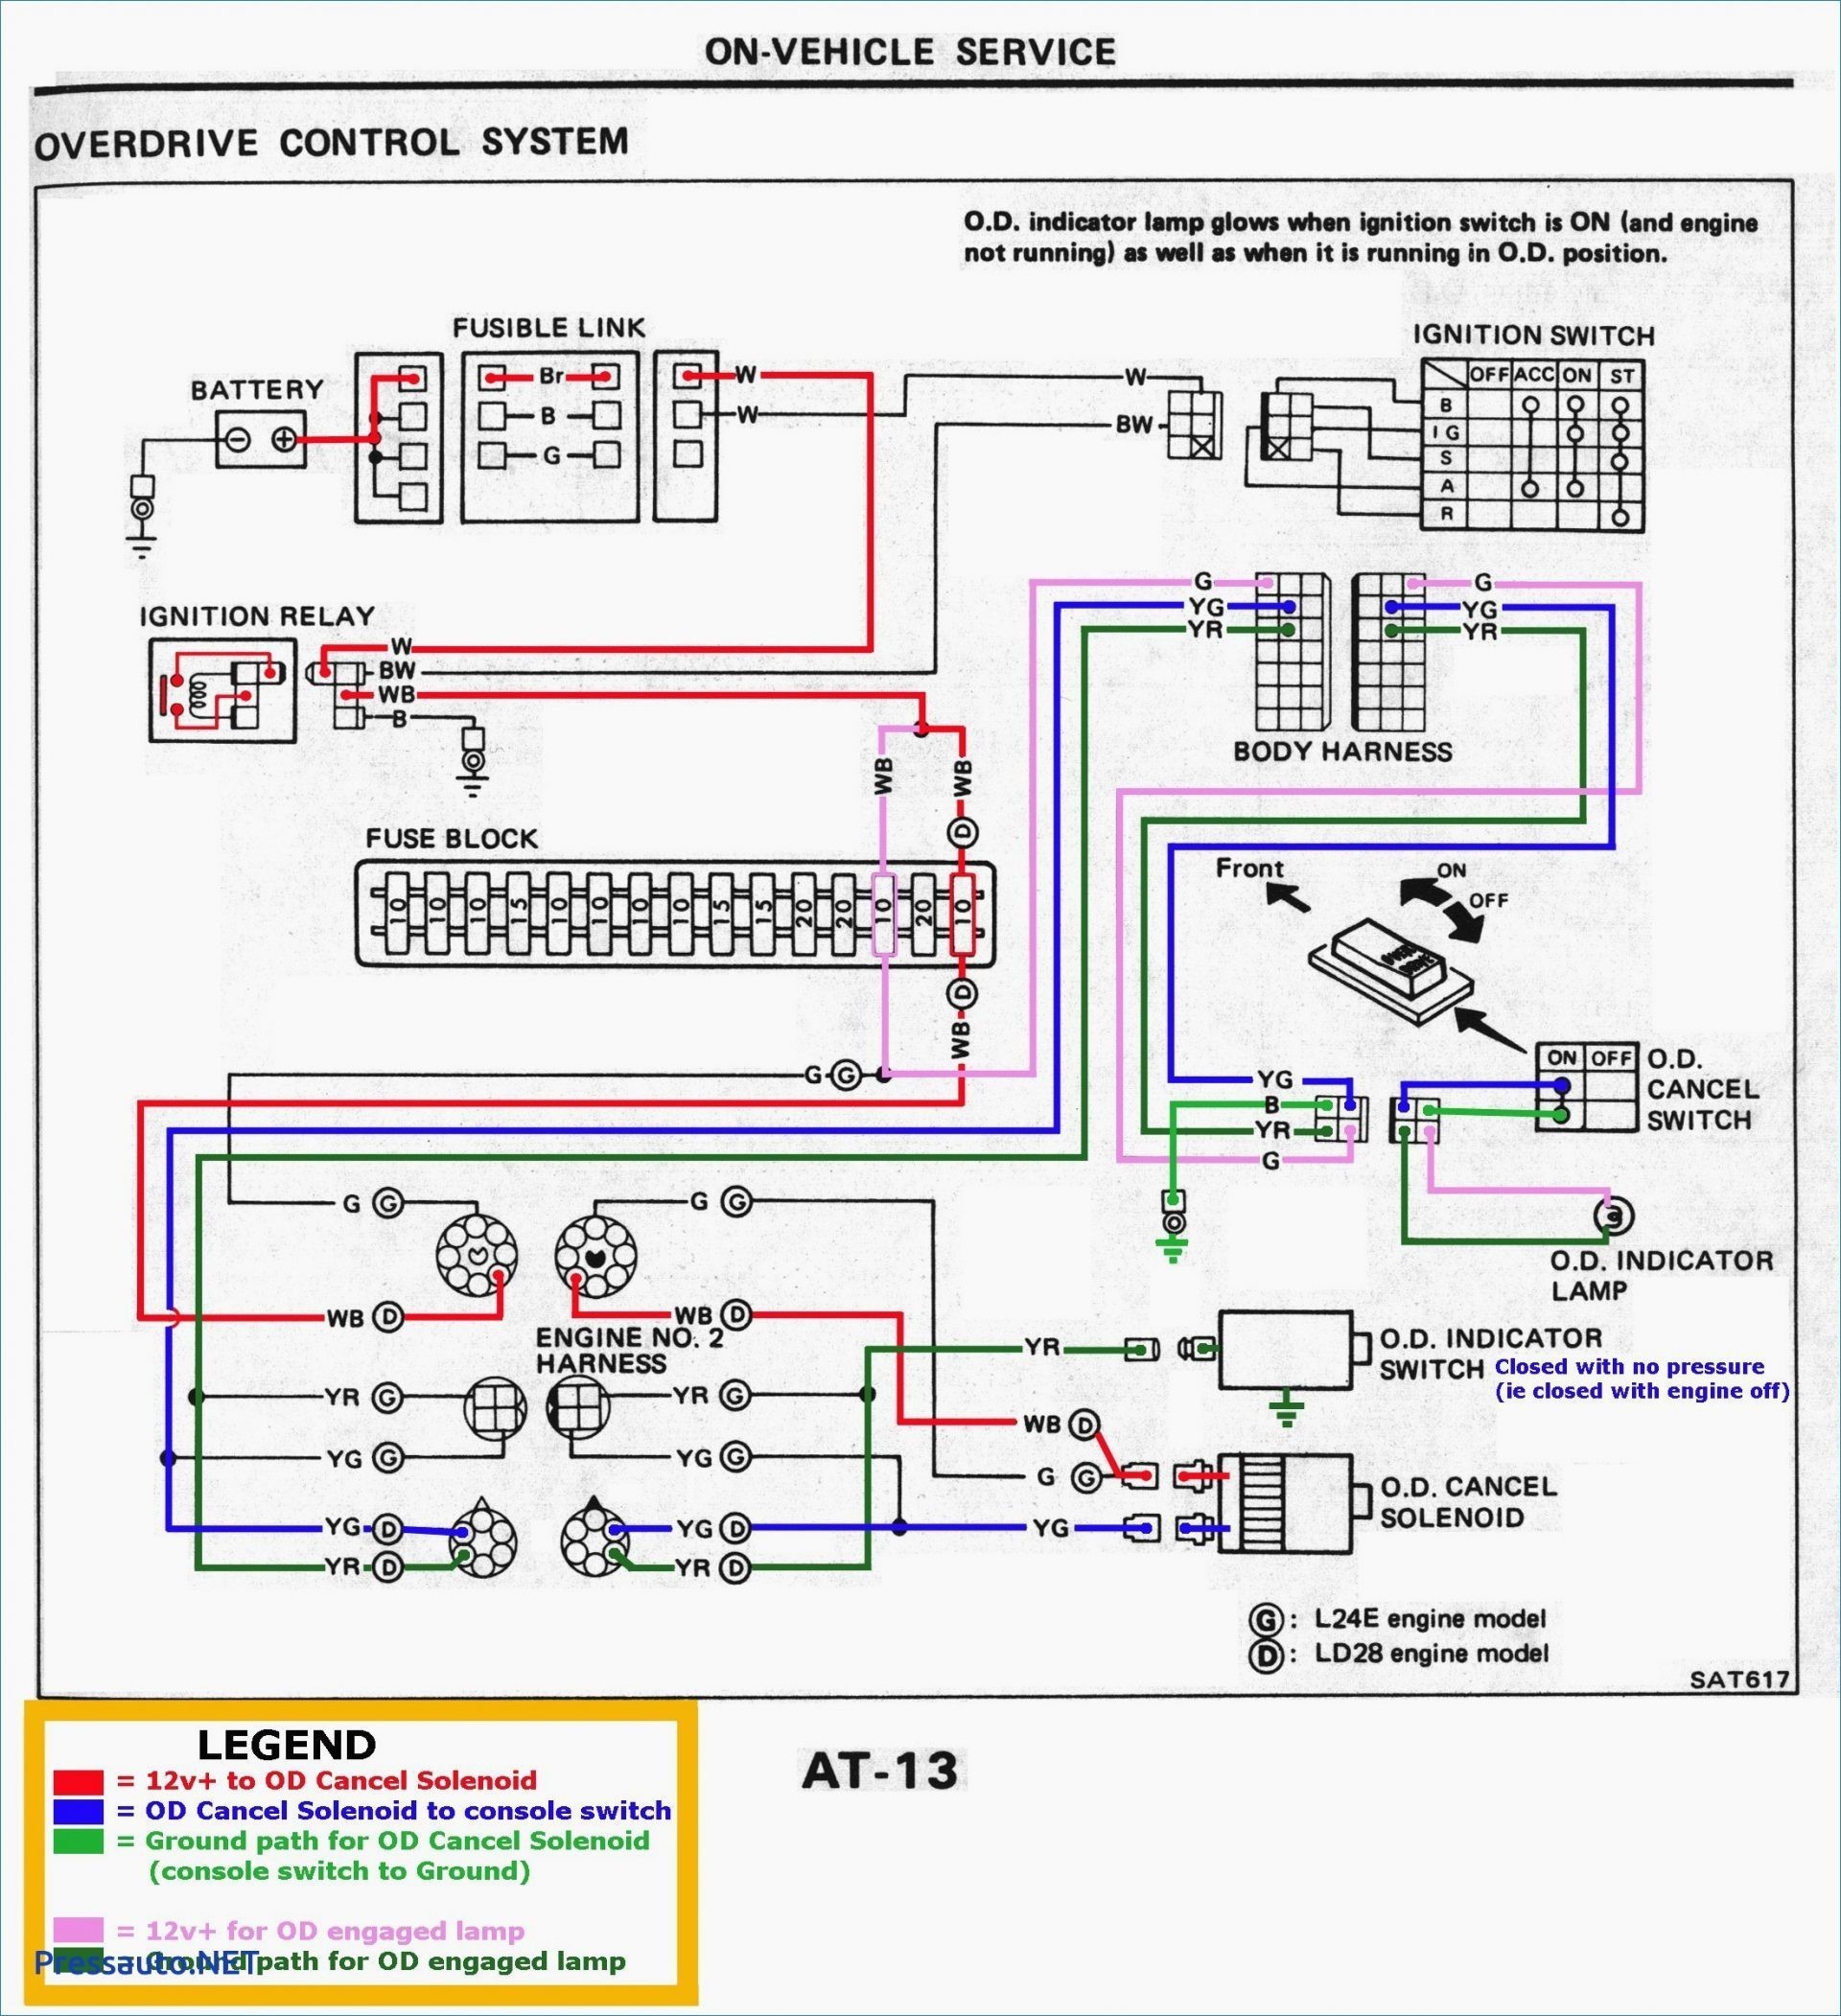 House Wiring Diagram Us New House Electrical Wiring Diagram Australia Valid Wiring Diagram Fresh